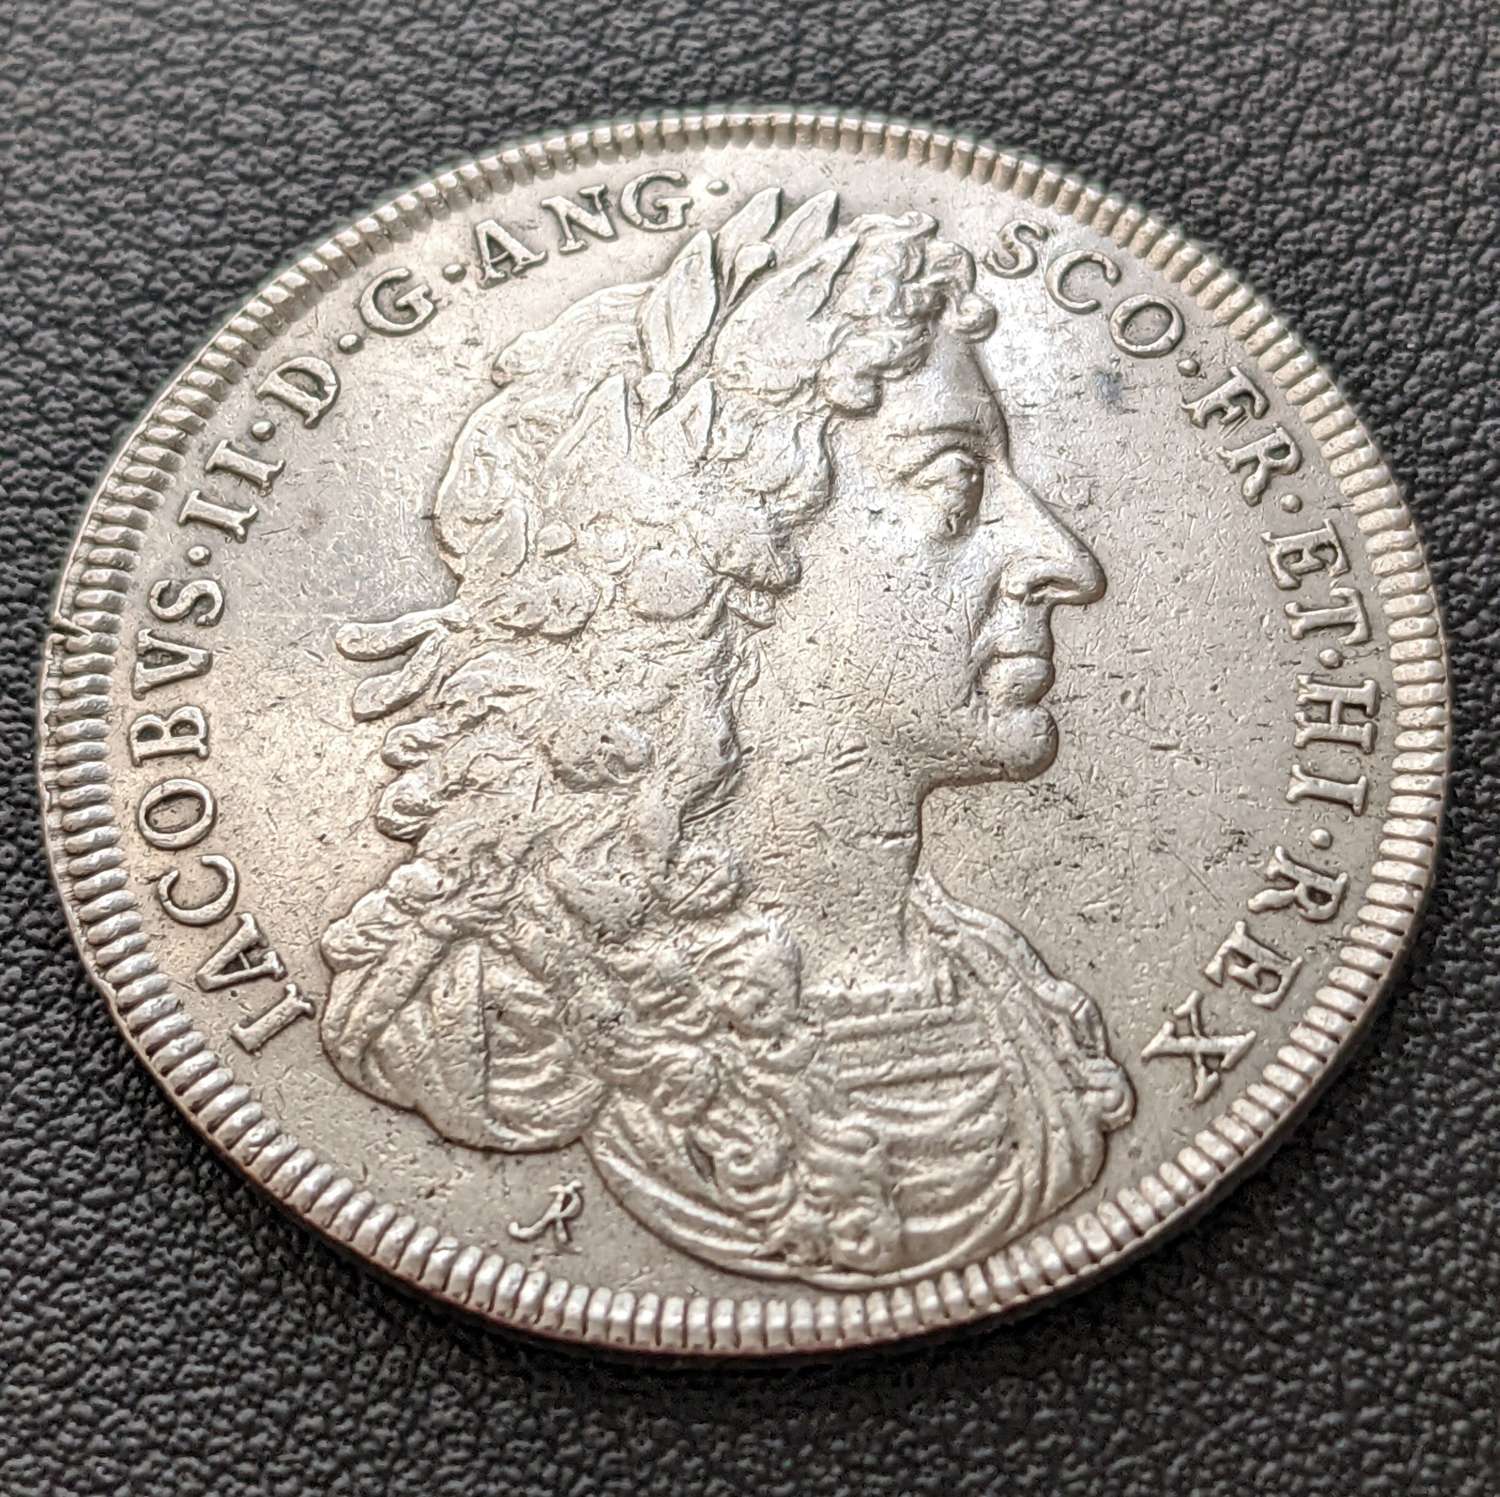 Official Issue Coronation Medallion James II, 1685